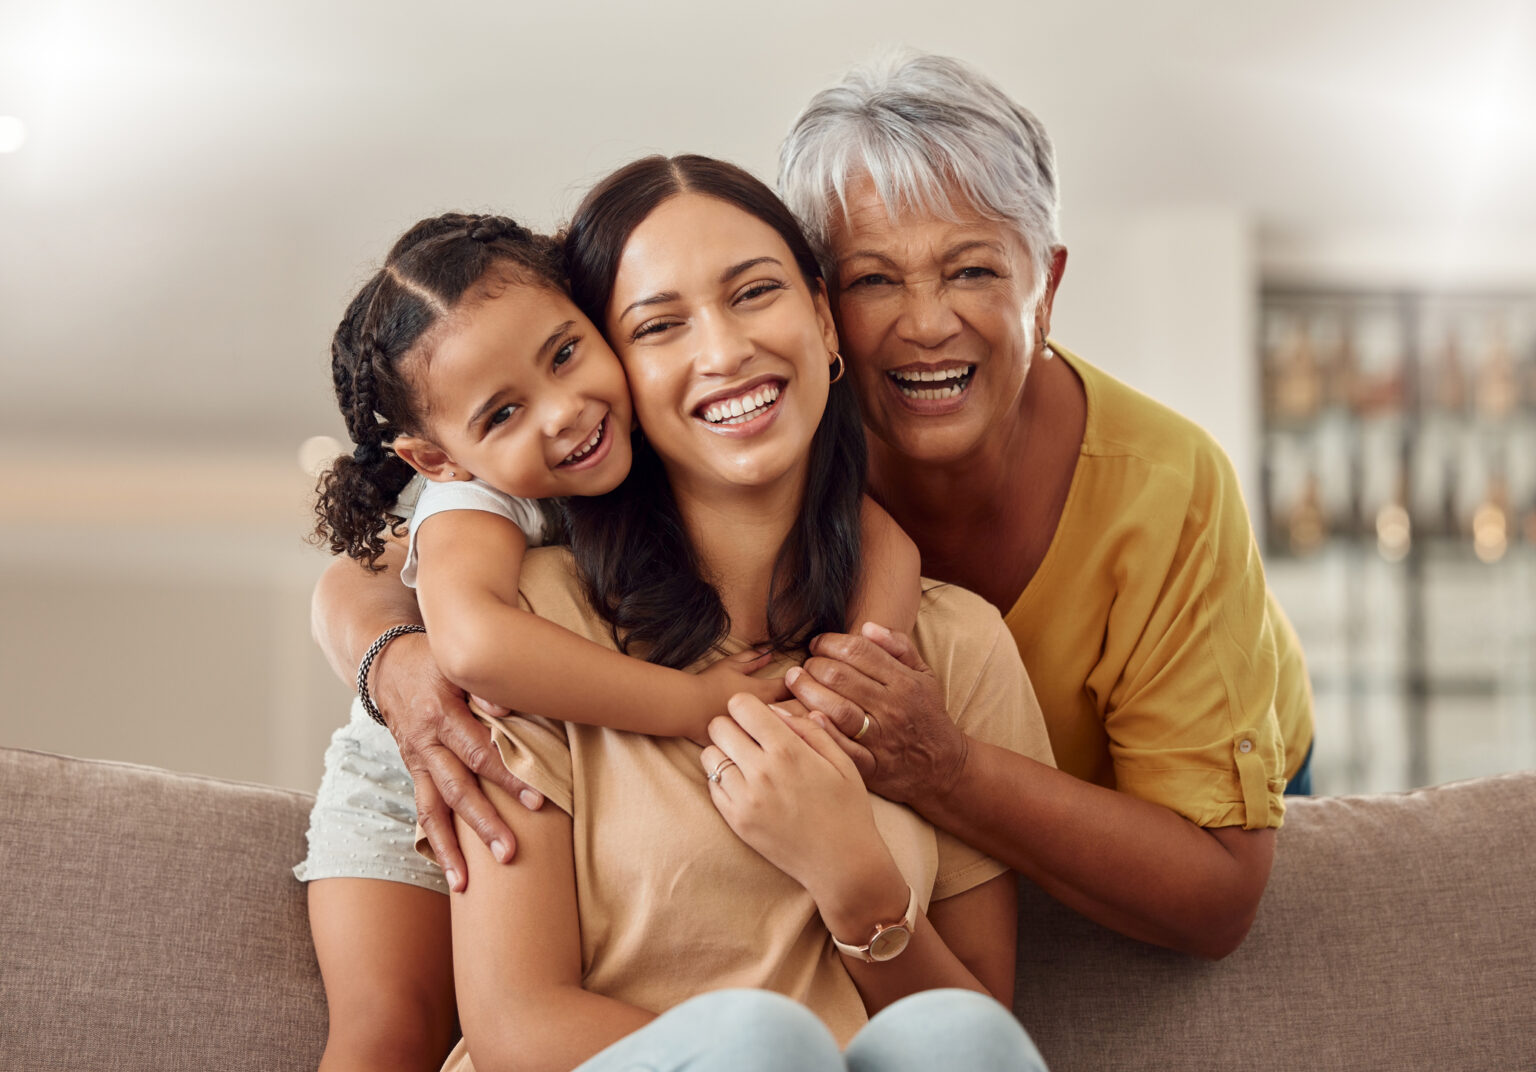 Grandmother, mom and child hug in a portrait for mothers day on a house sofa as a happy family in Colombia. Smile, mama and elderly woman love hugging young girl or kid and enjoying quality time